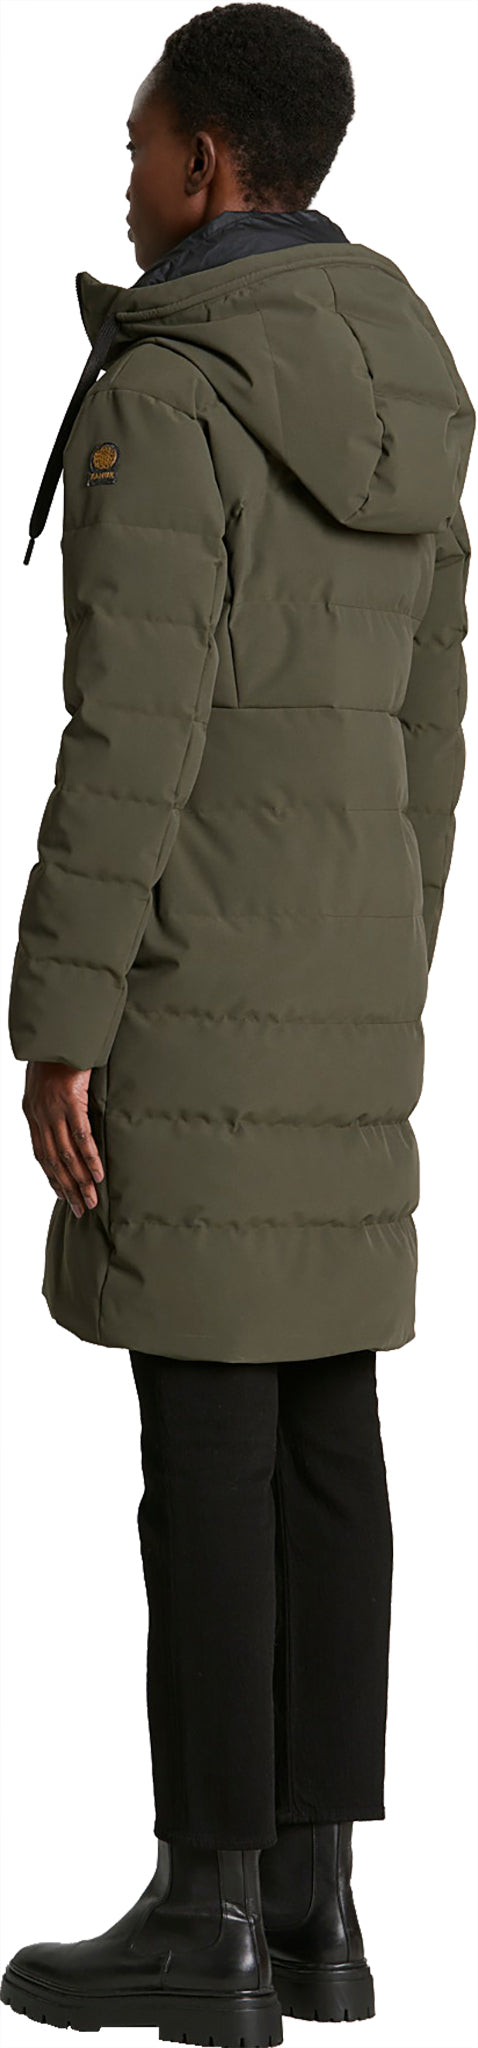 Notting Hill fitted puffer jacket, Kanuk, Women's Quilted and Down Coats  Fall/Winter 2019